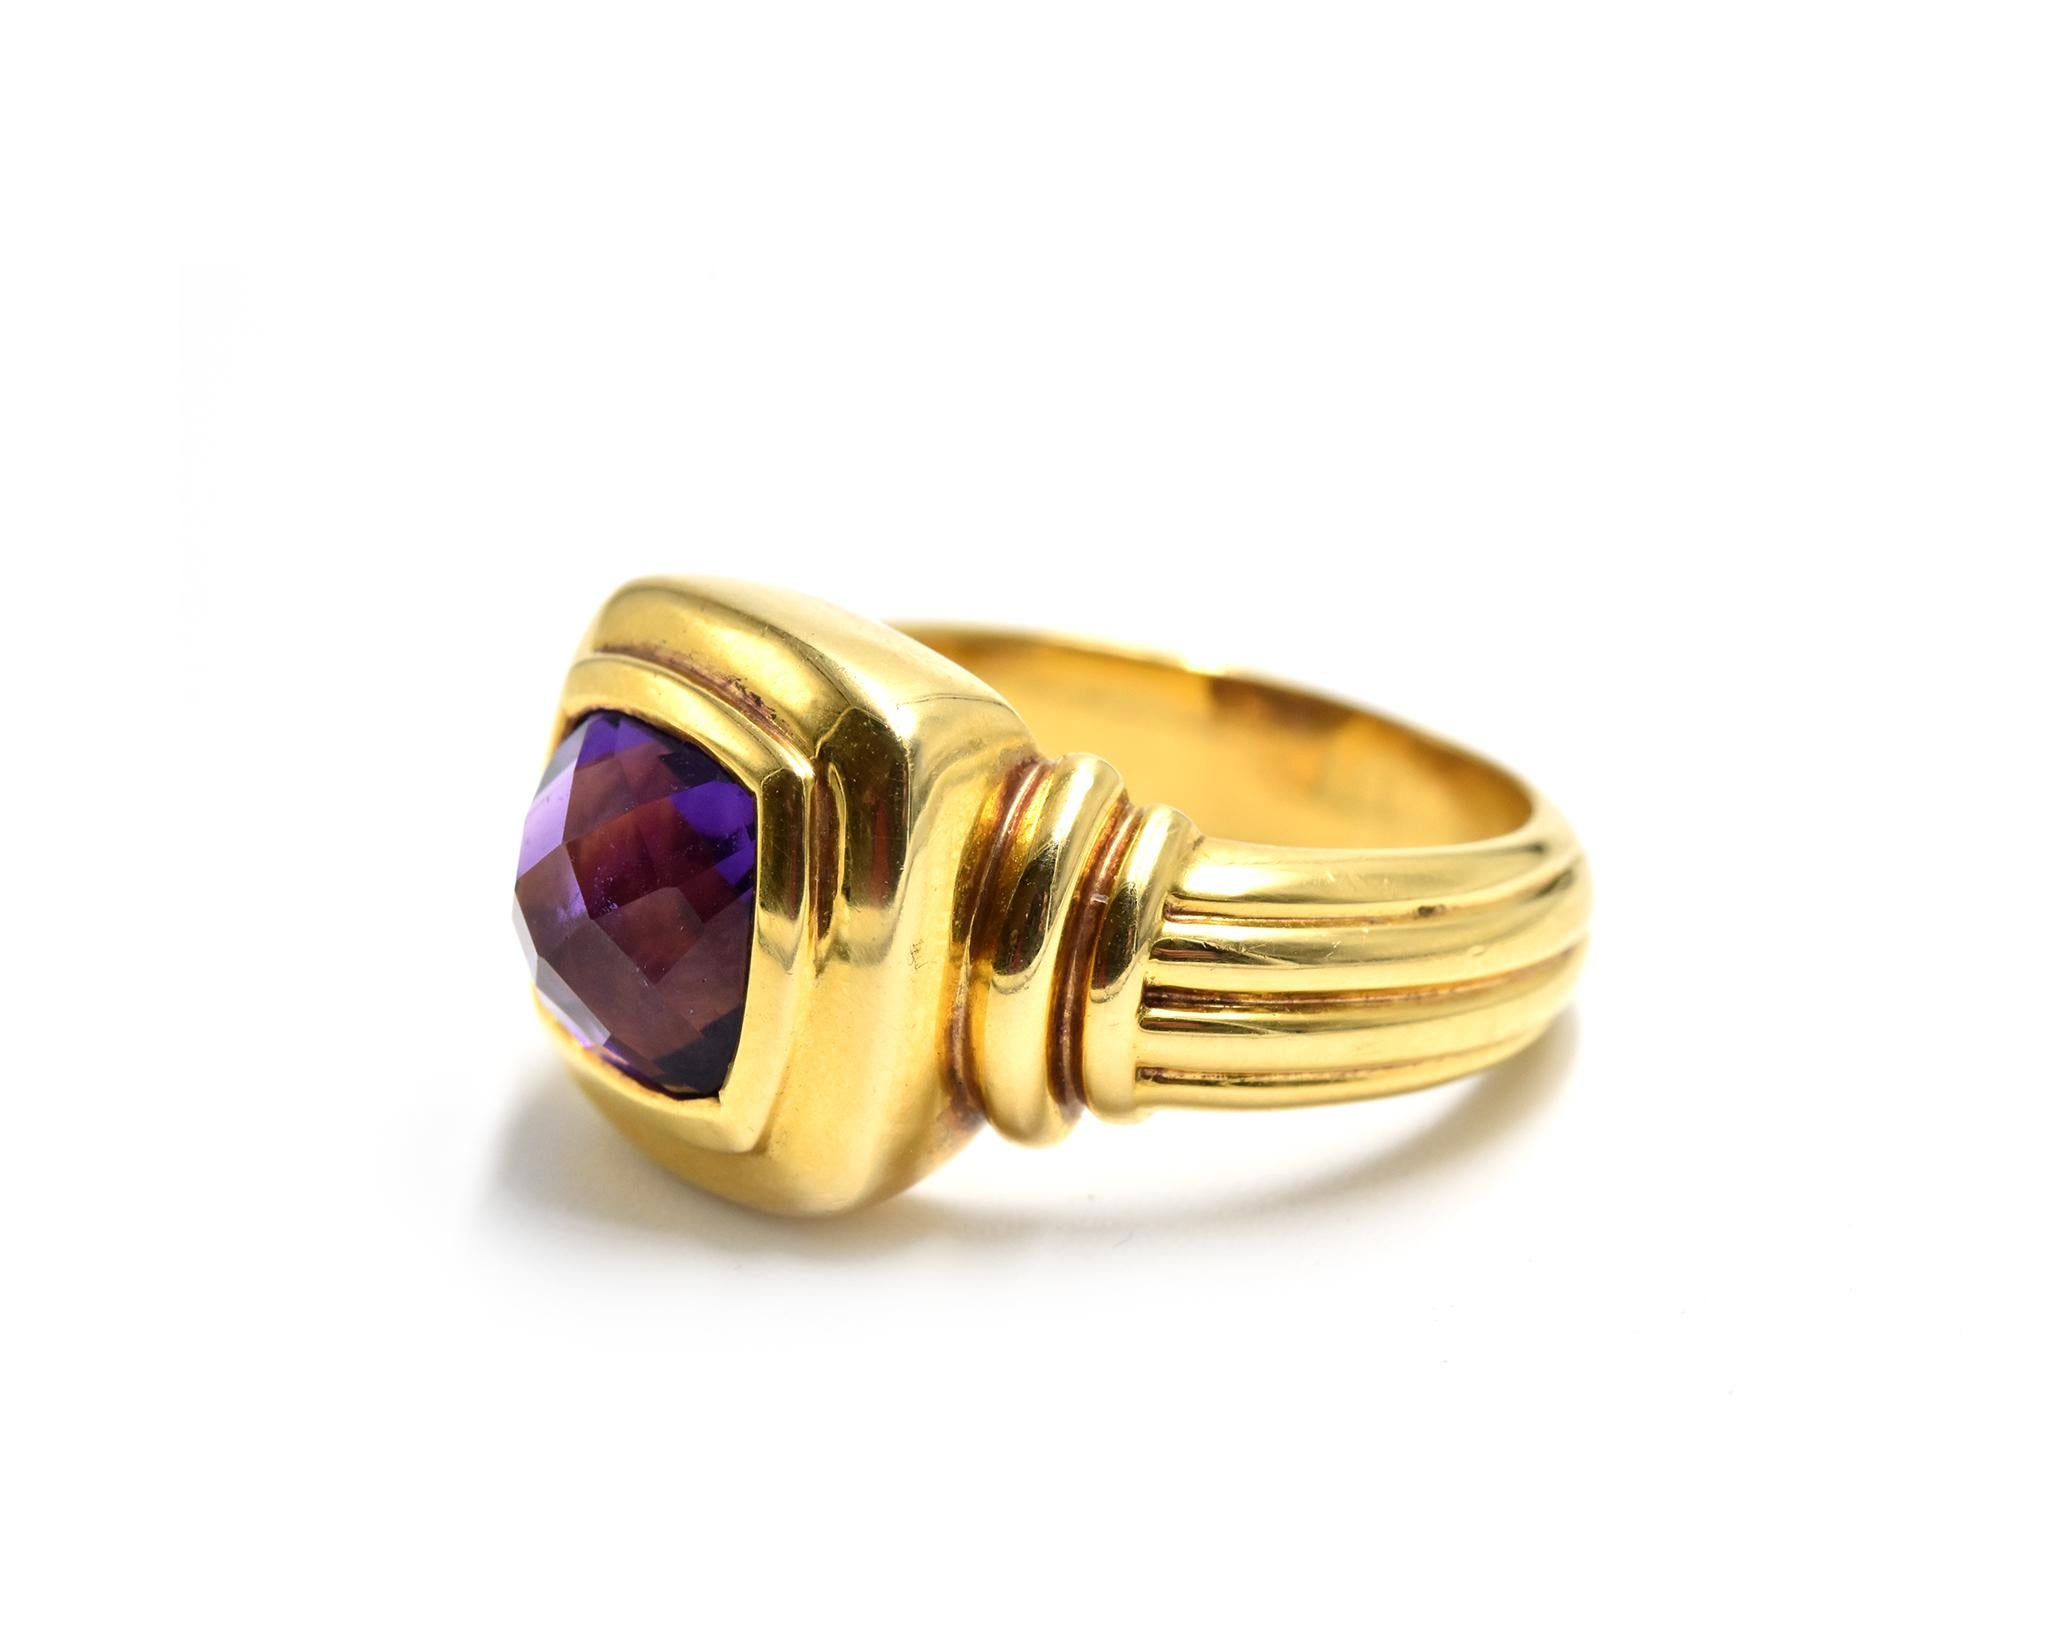 Designer: custom design
Material: 18k yellow gold
Amethyst: checkerboard faceted cushion cut 2.20 carat amethyst gemstone
Dimensions: ring top measures 1/2-inch long
Ring Size: 6 3/4 (please allow two additional shipping days for sizing